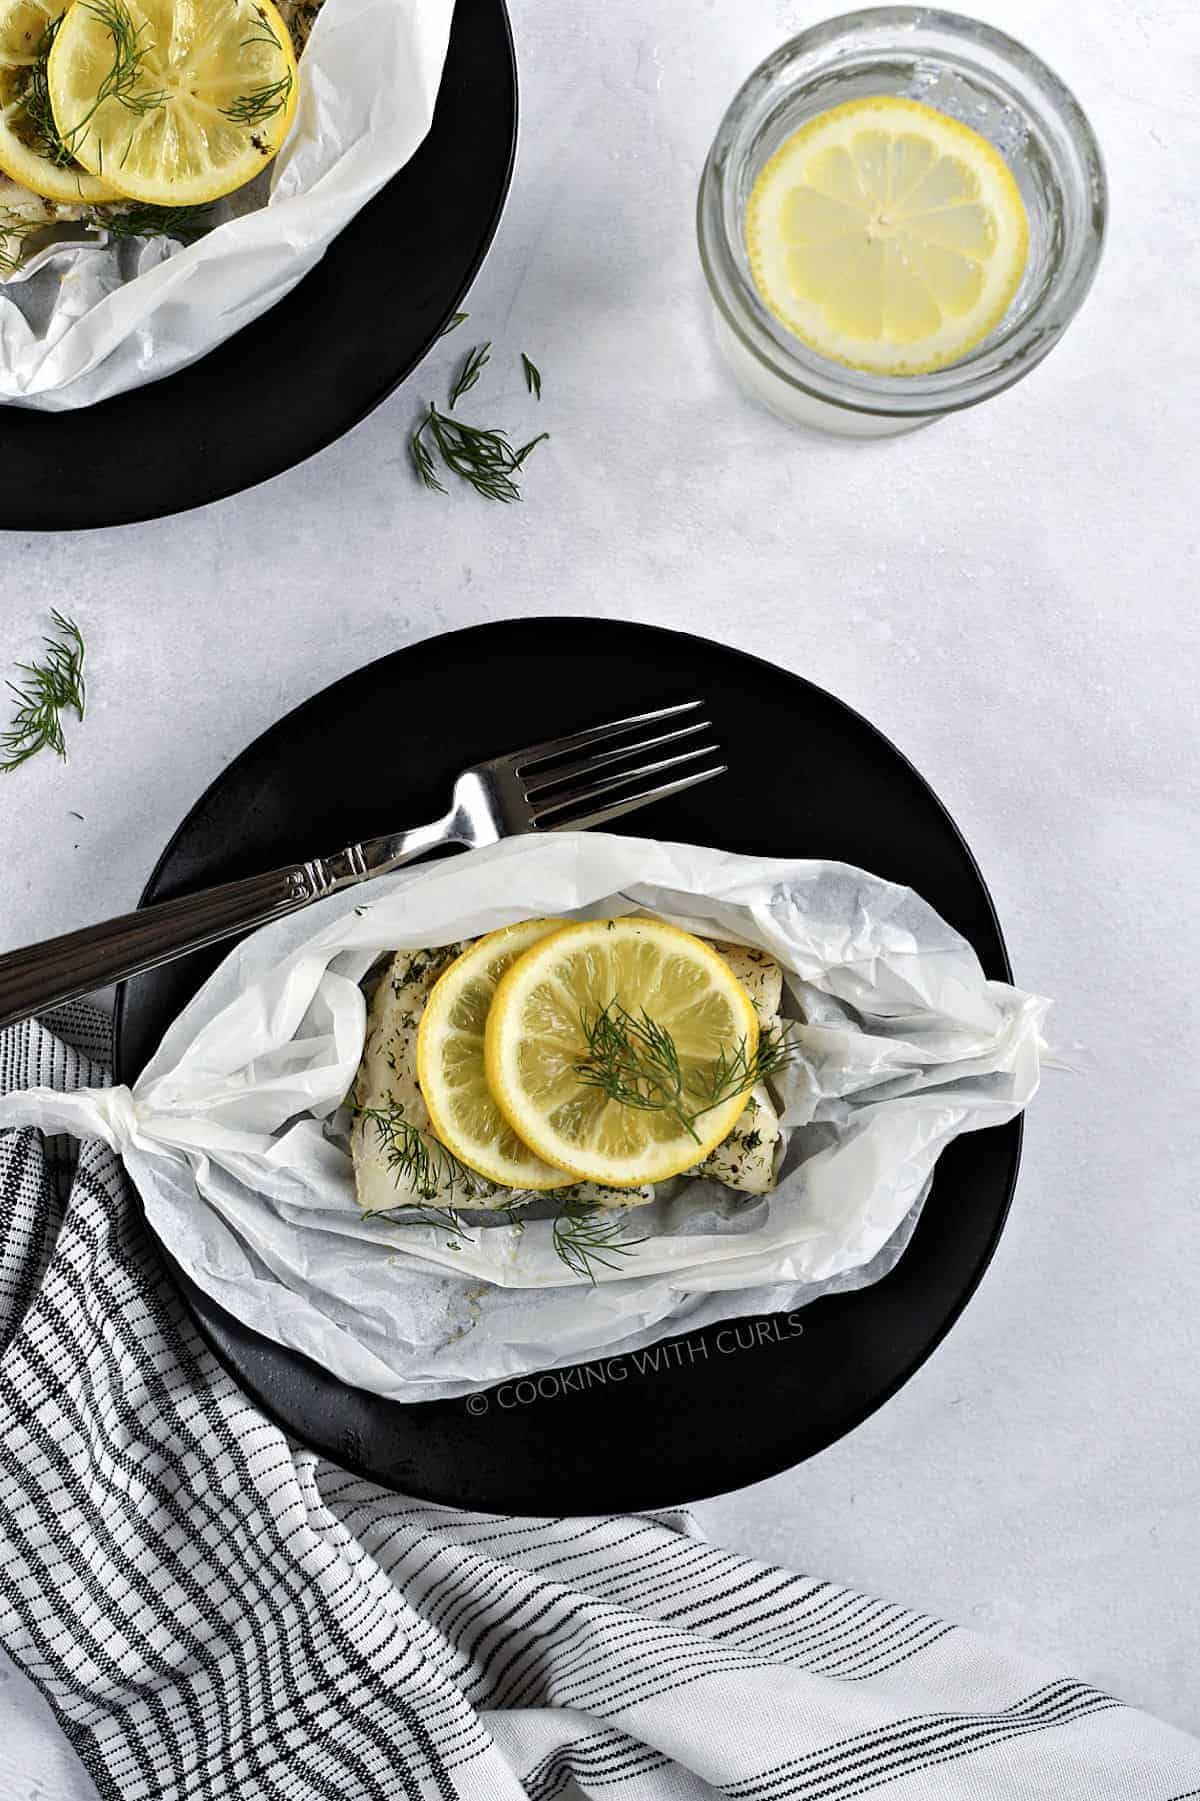 Looking down on two Lemon-Dill Cod fillets baked in Parchment Paper and served on black plates with a glass of lemon water in between the two plates. 